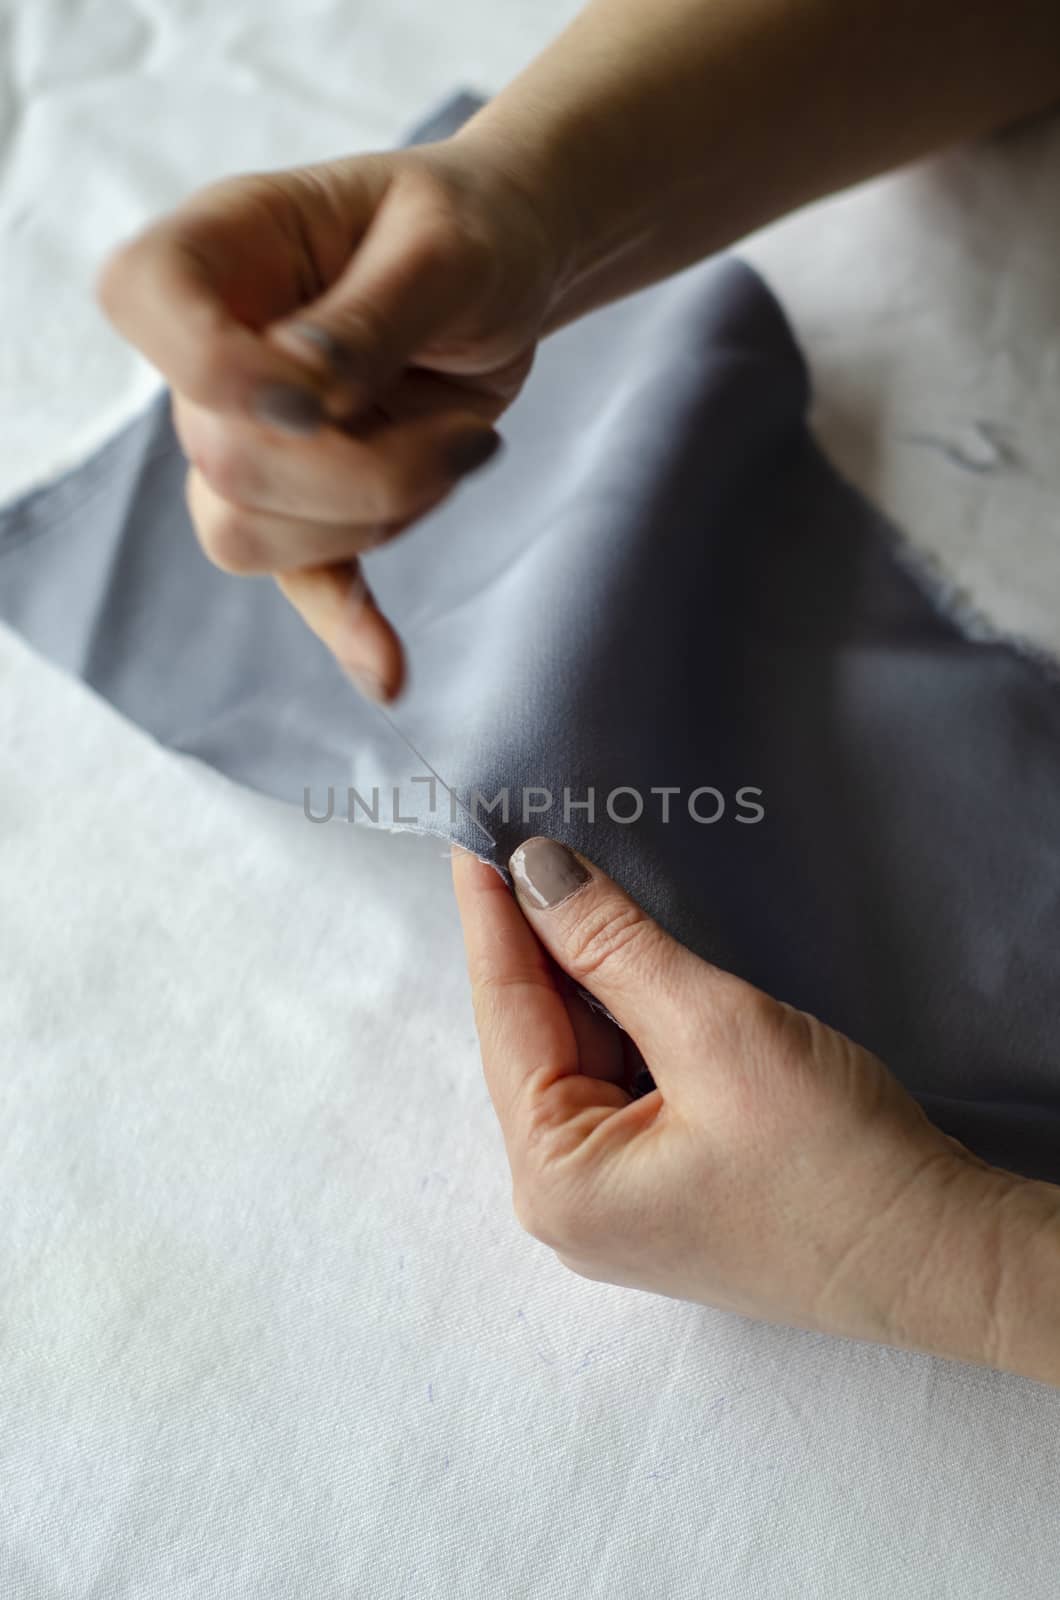 Tailor Sews a Dress 2 by Hasilyus